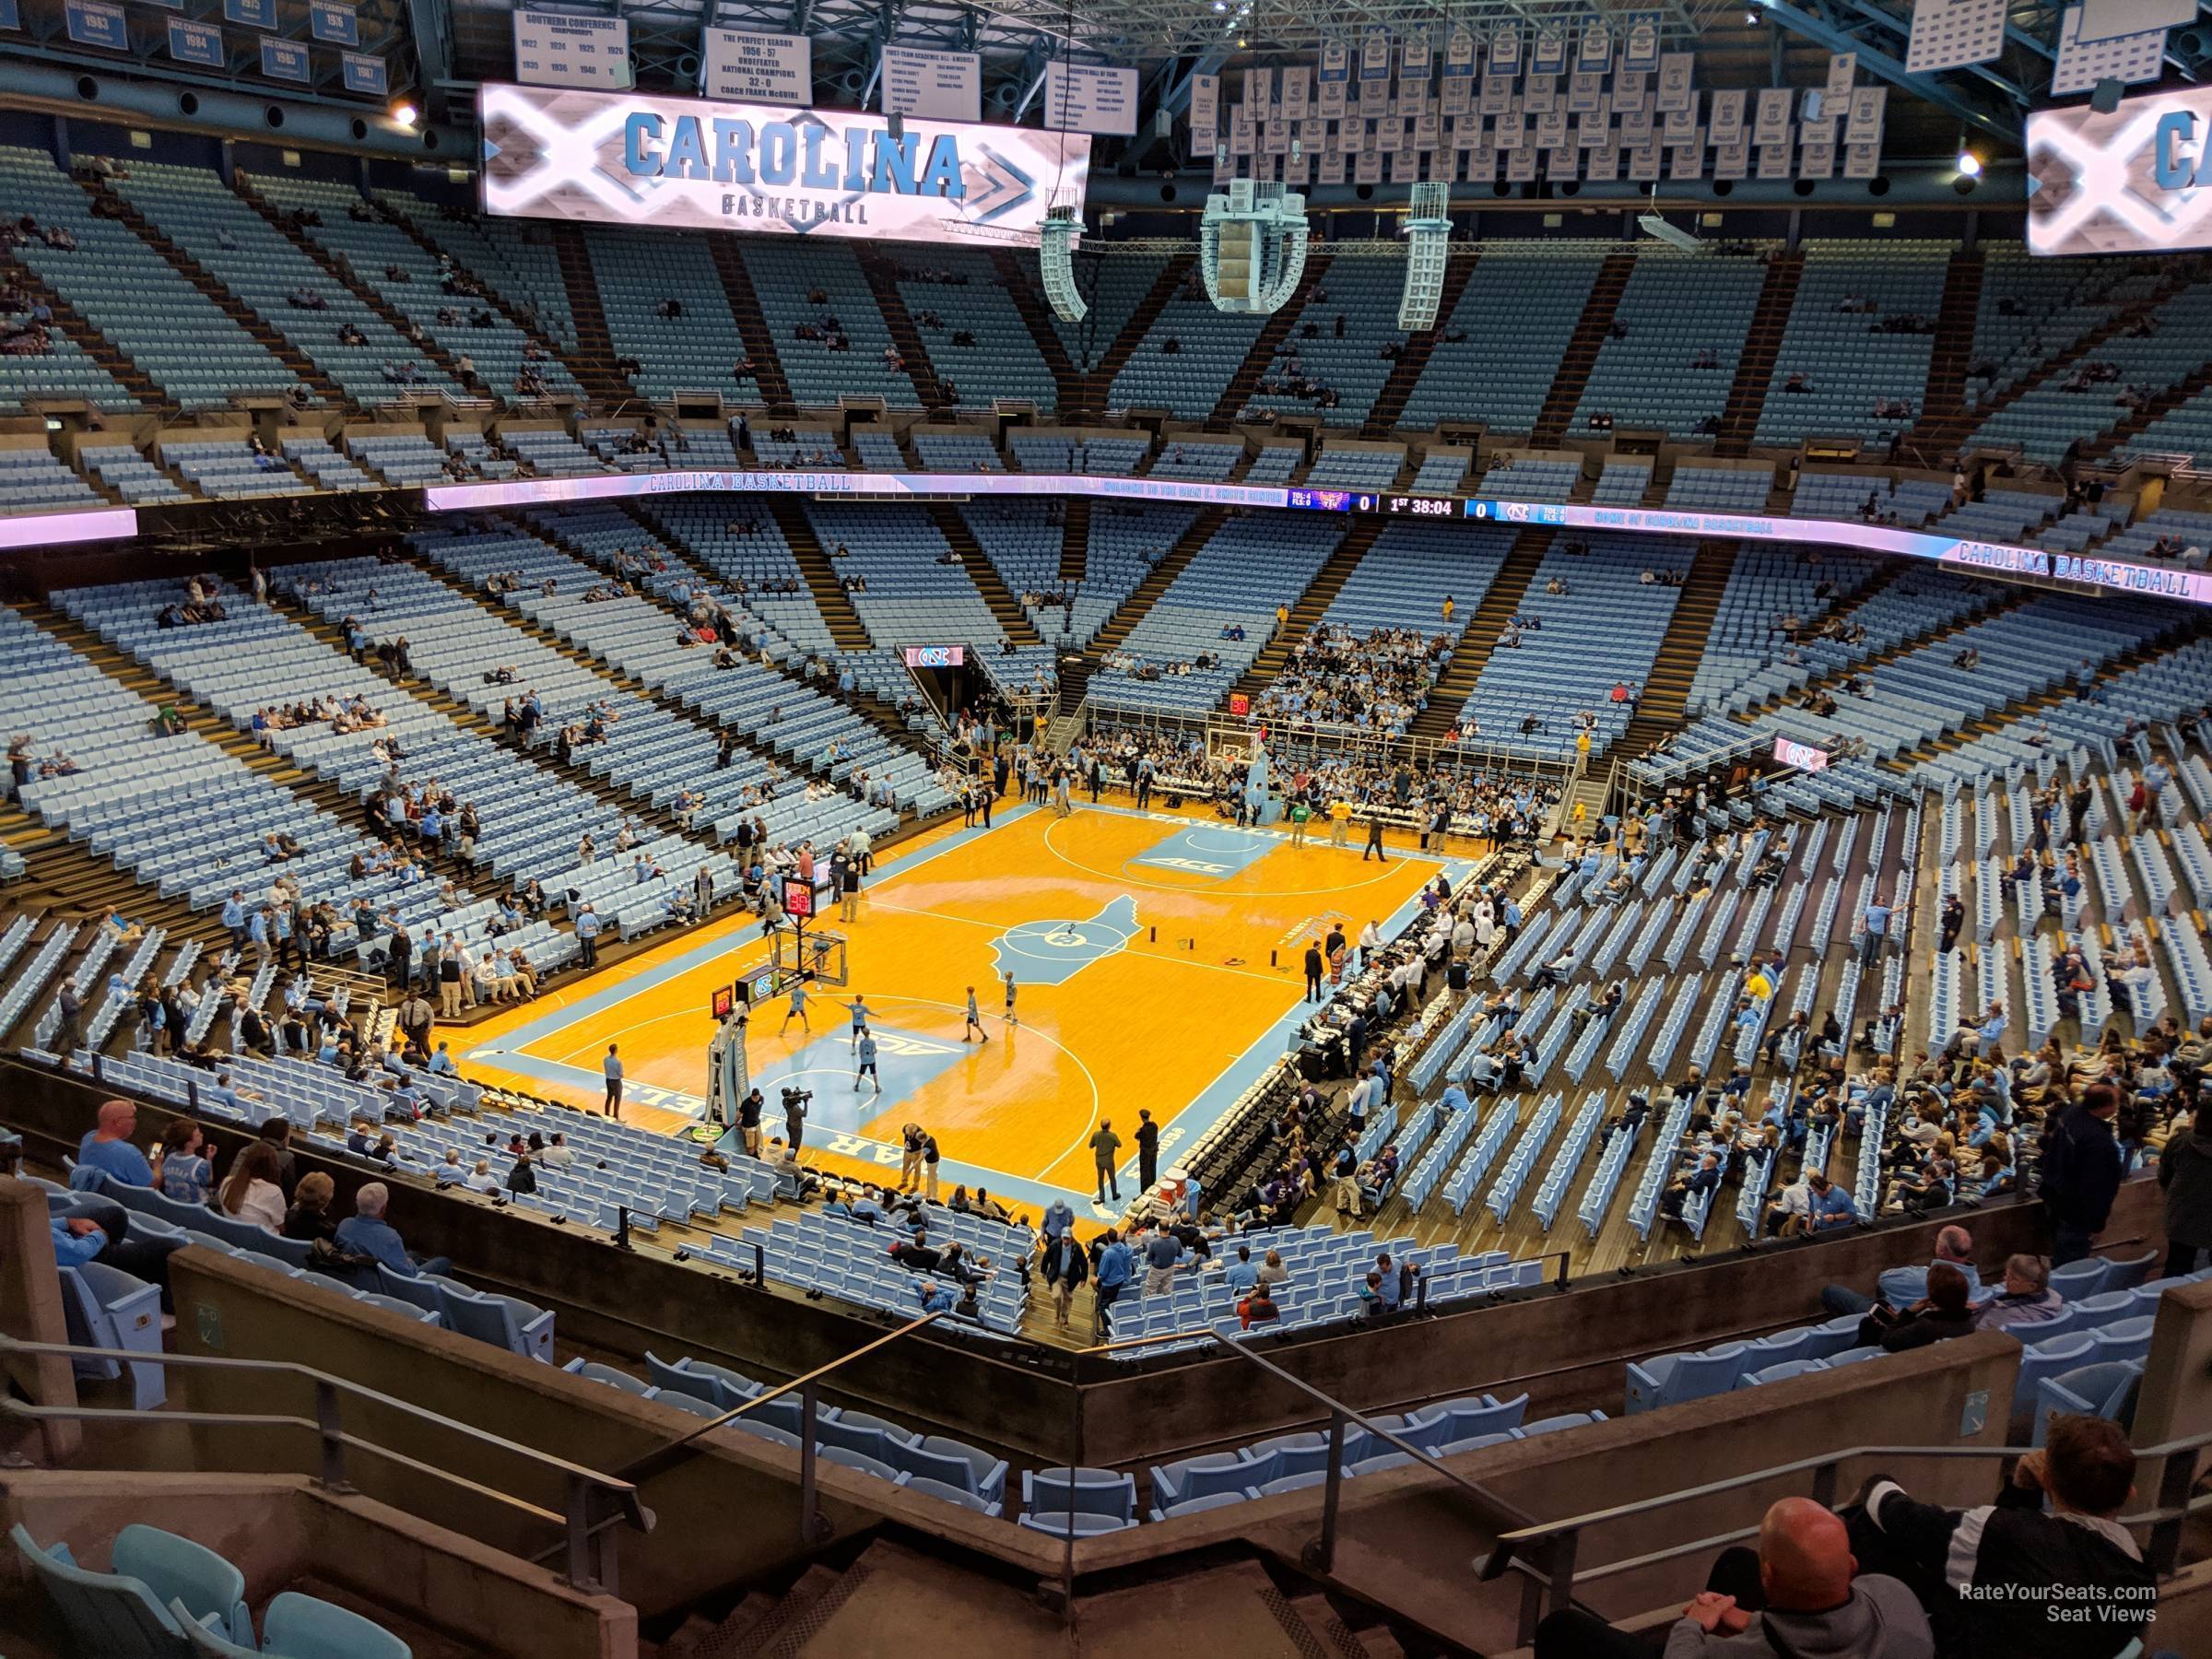 section 202a, row i seat view  - dean smith center